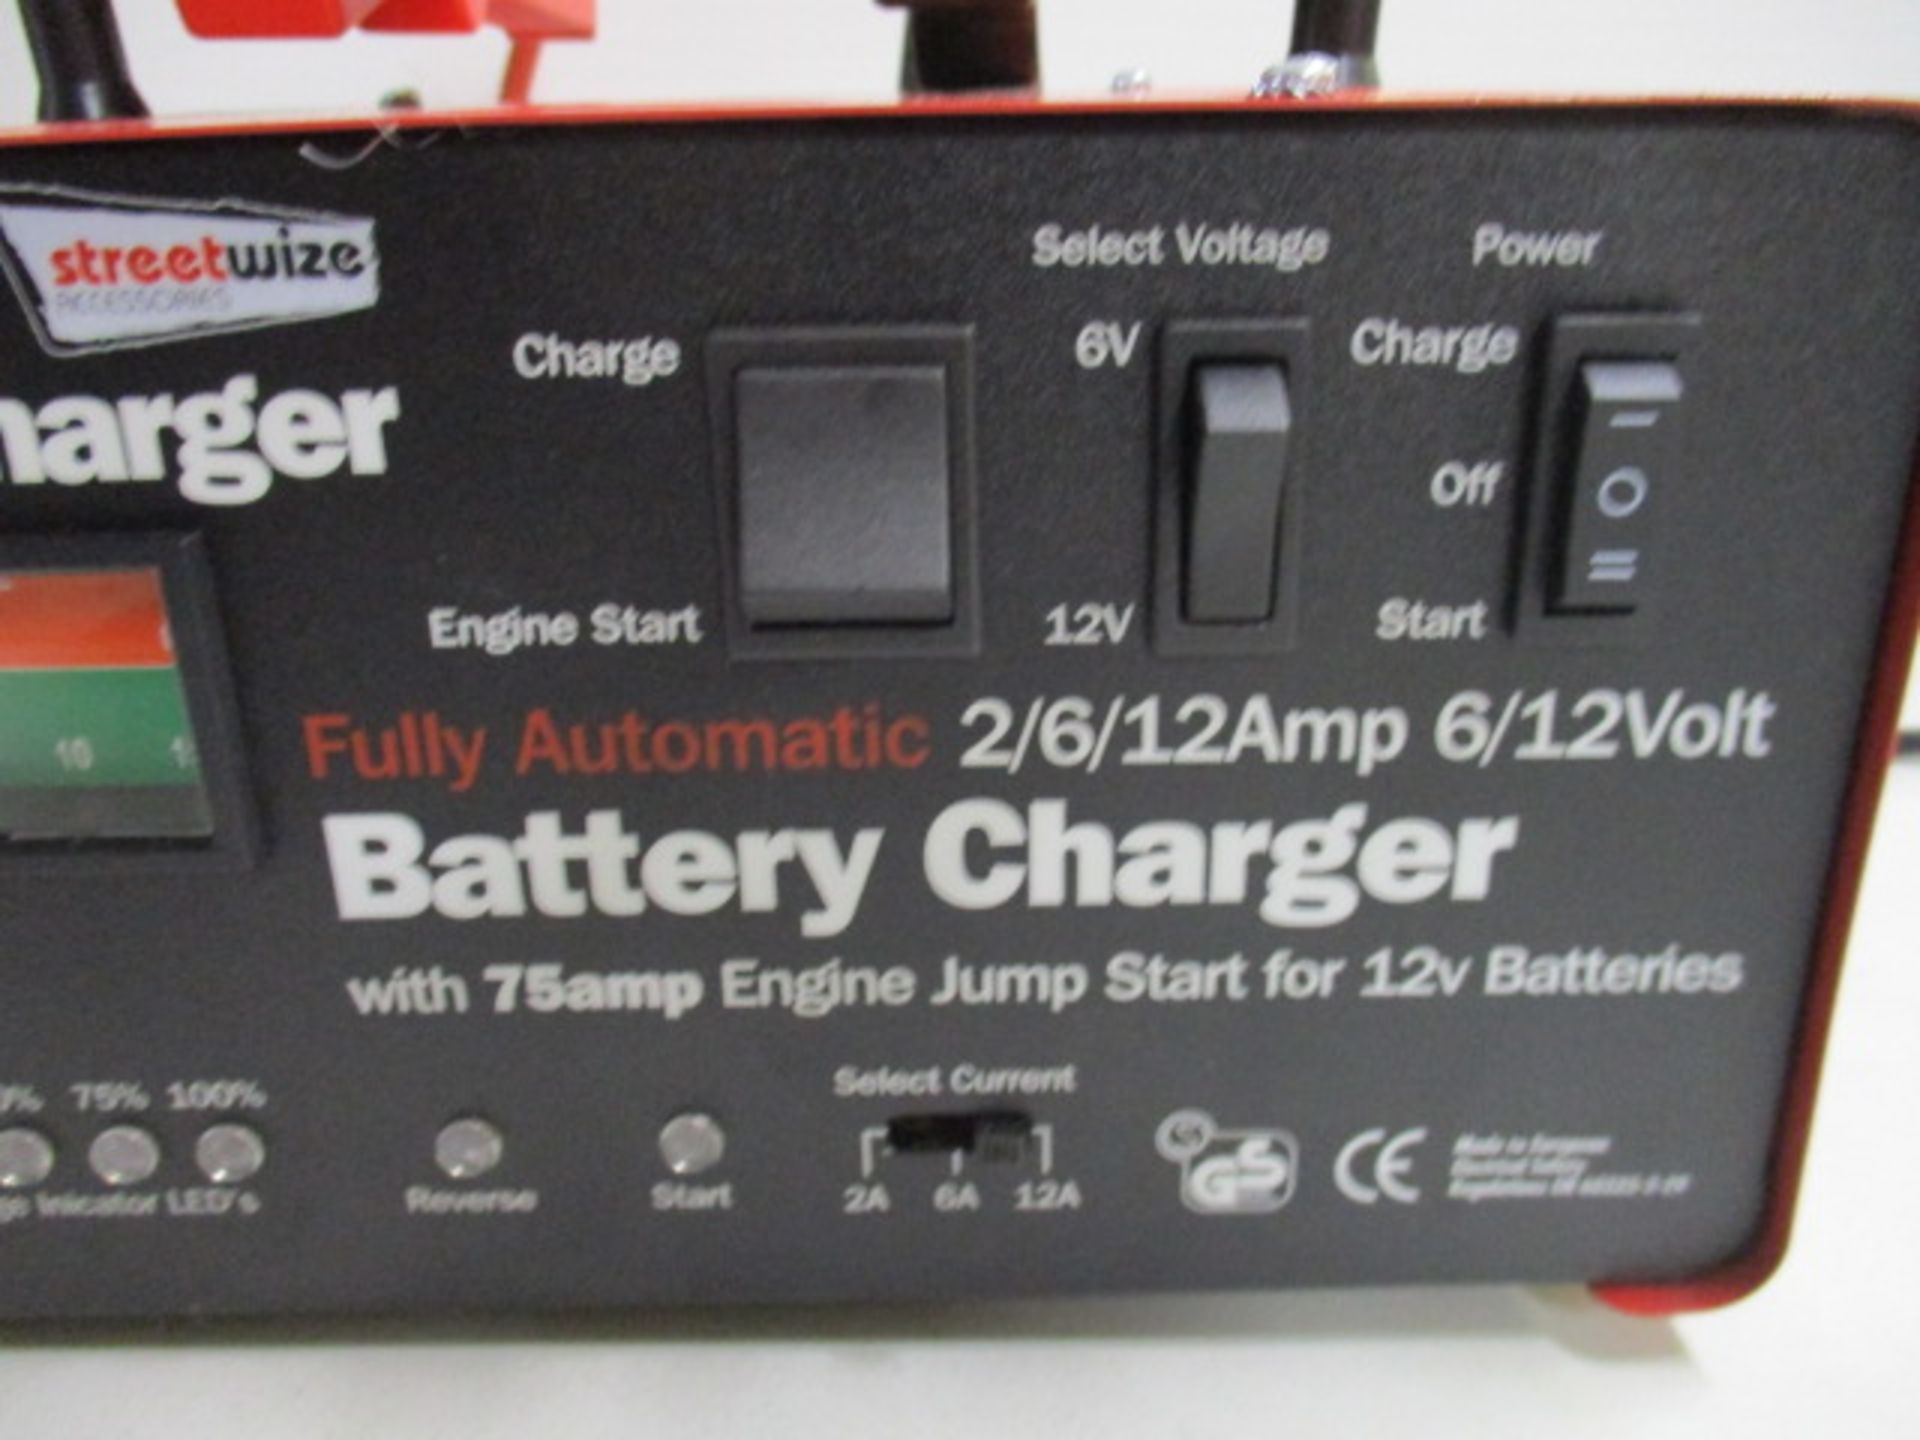 New Streetwize SW75JS fully automatic 2/6/12amp 6/12V battery charger with 75amp jump start unboxed - Image 2 of 4